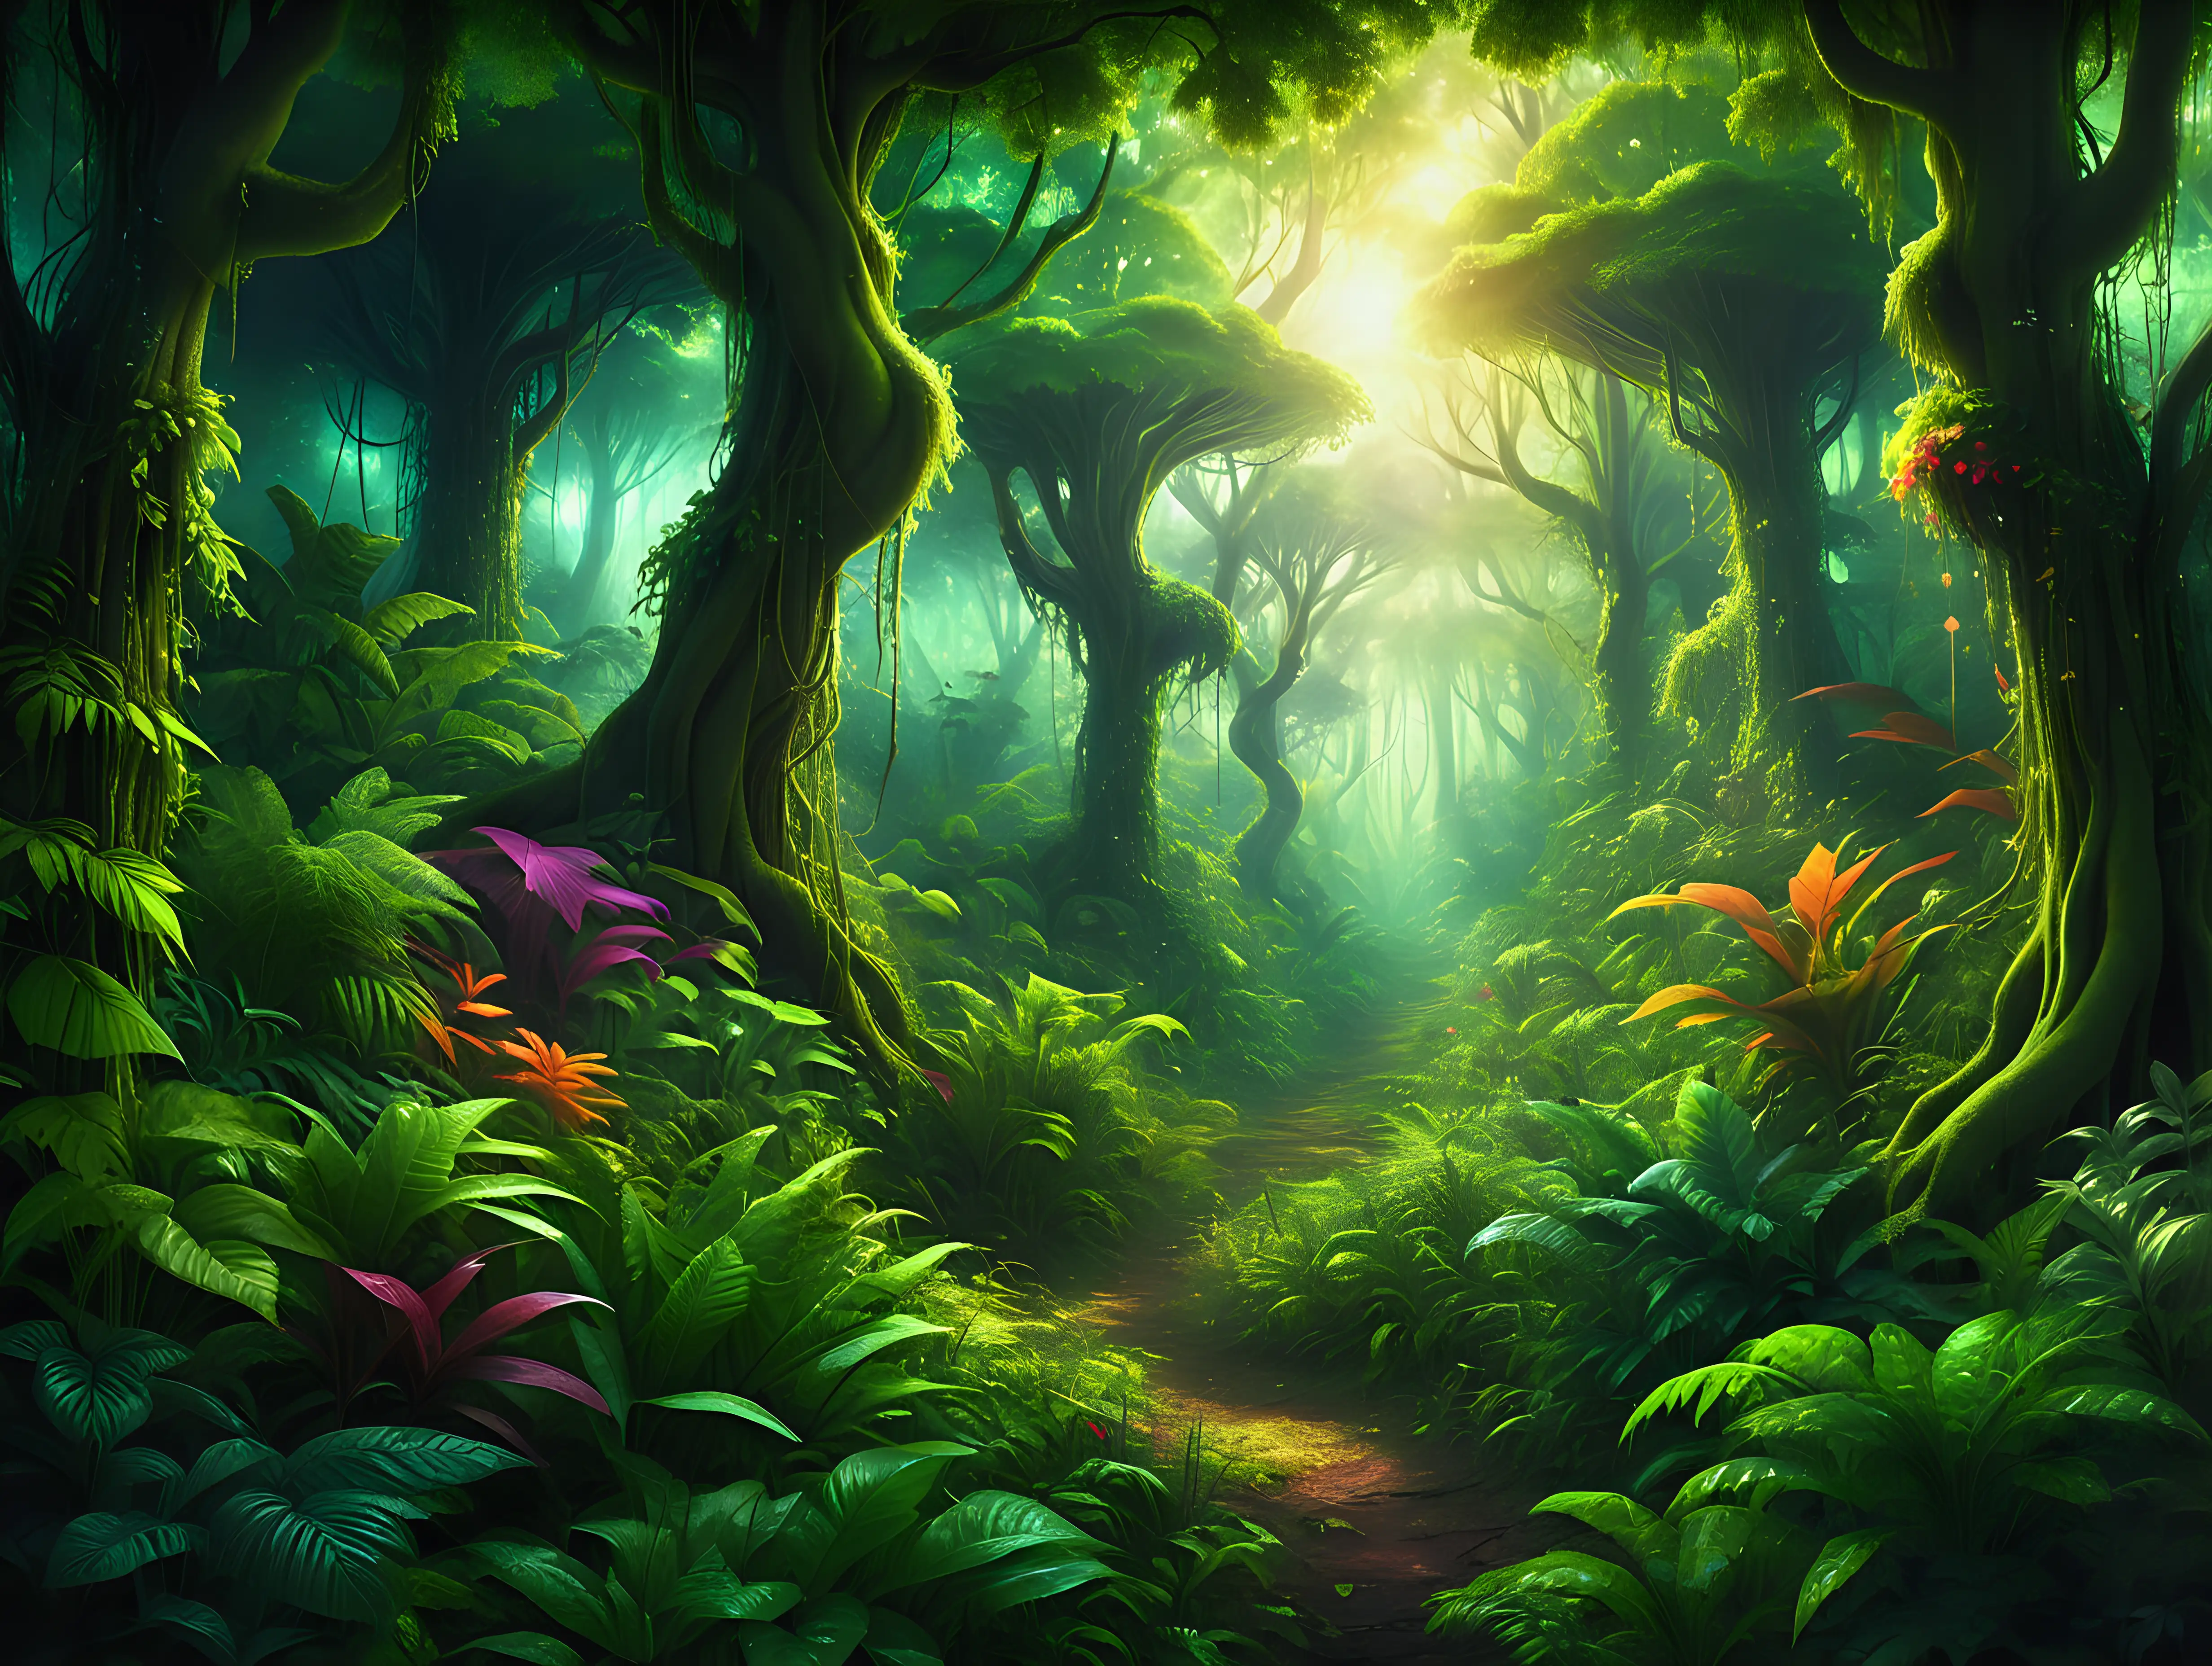 Enchanted-Dawn-in-Lush-Green-Forest